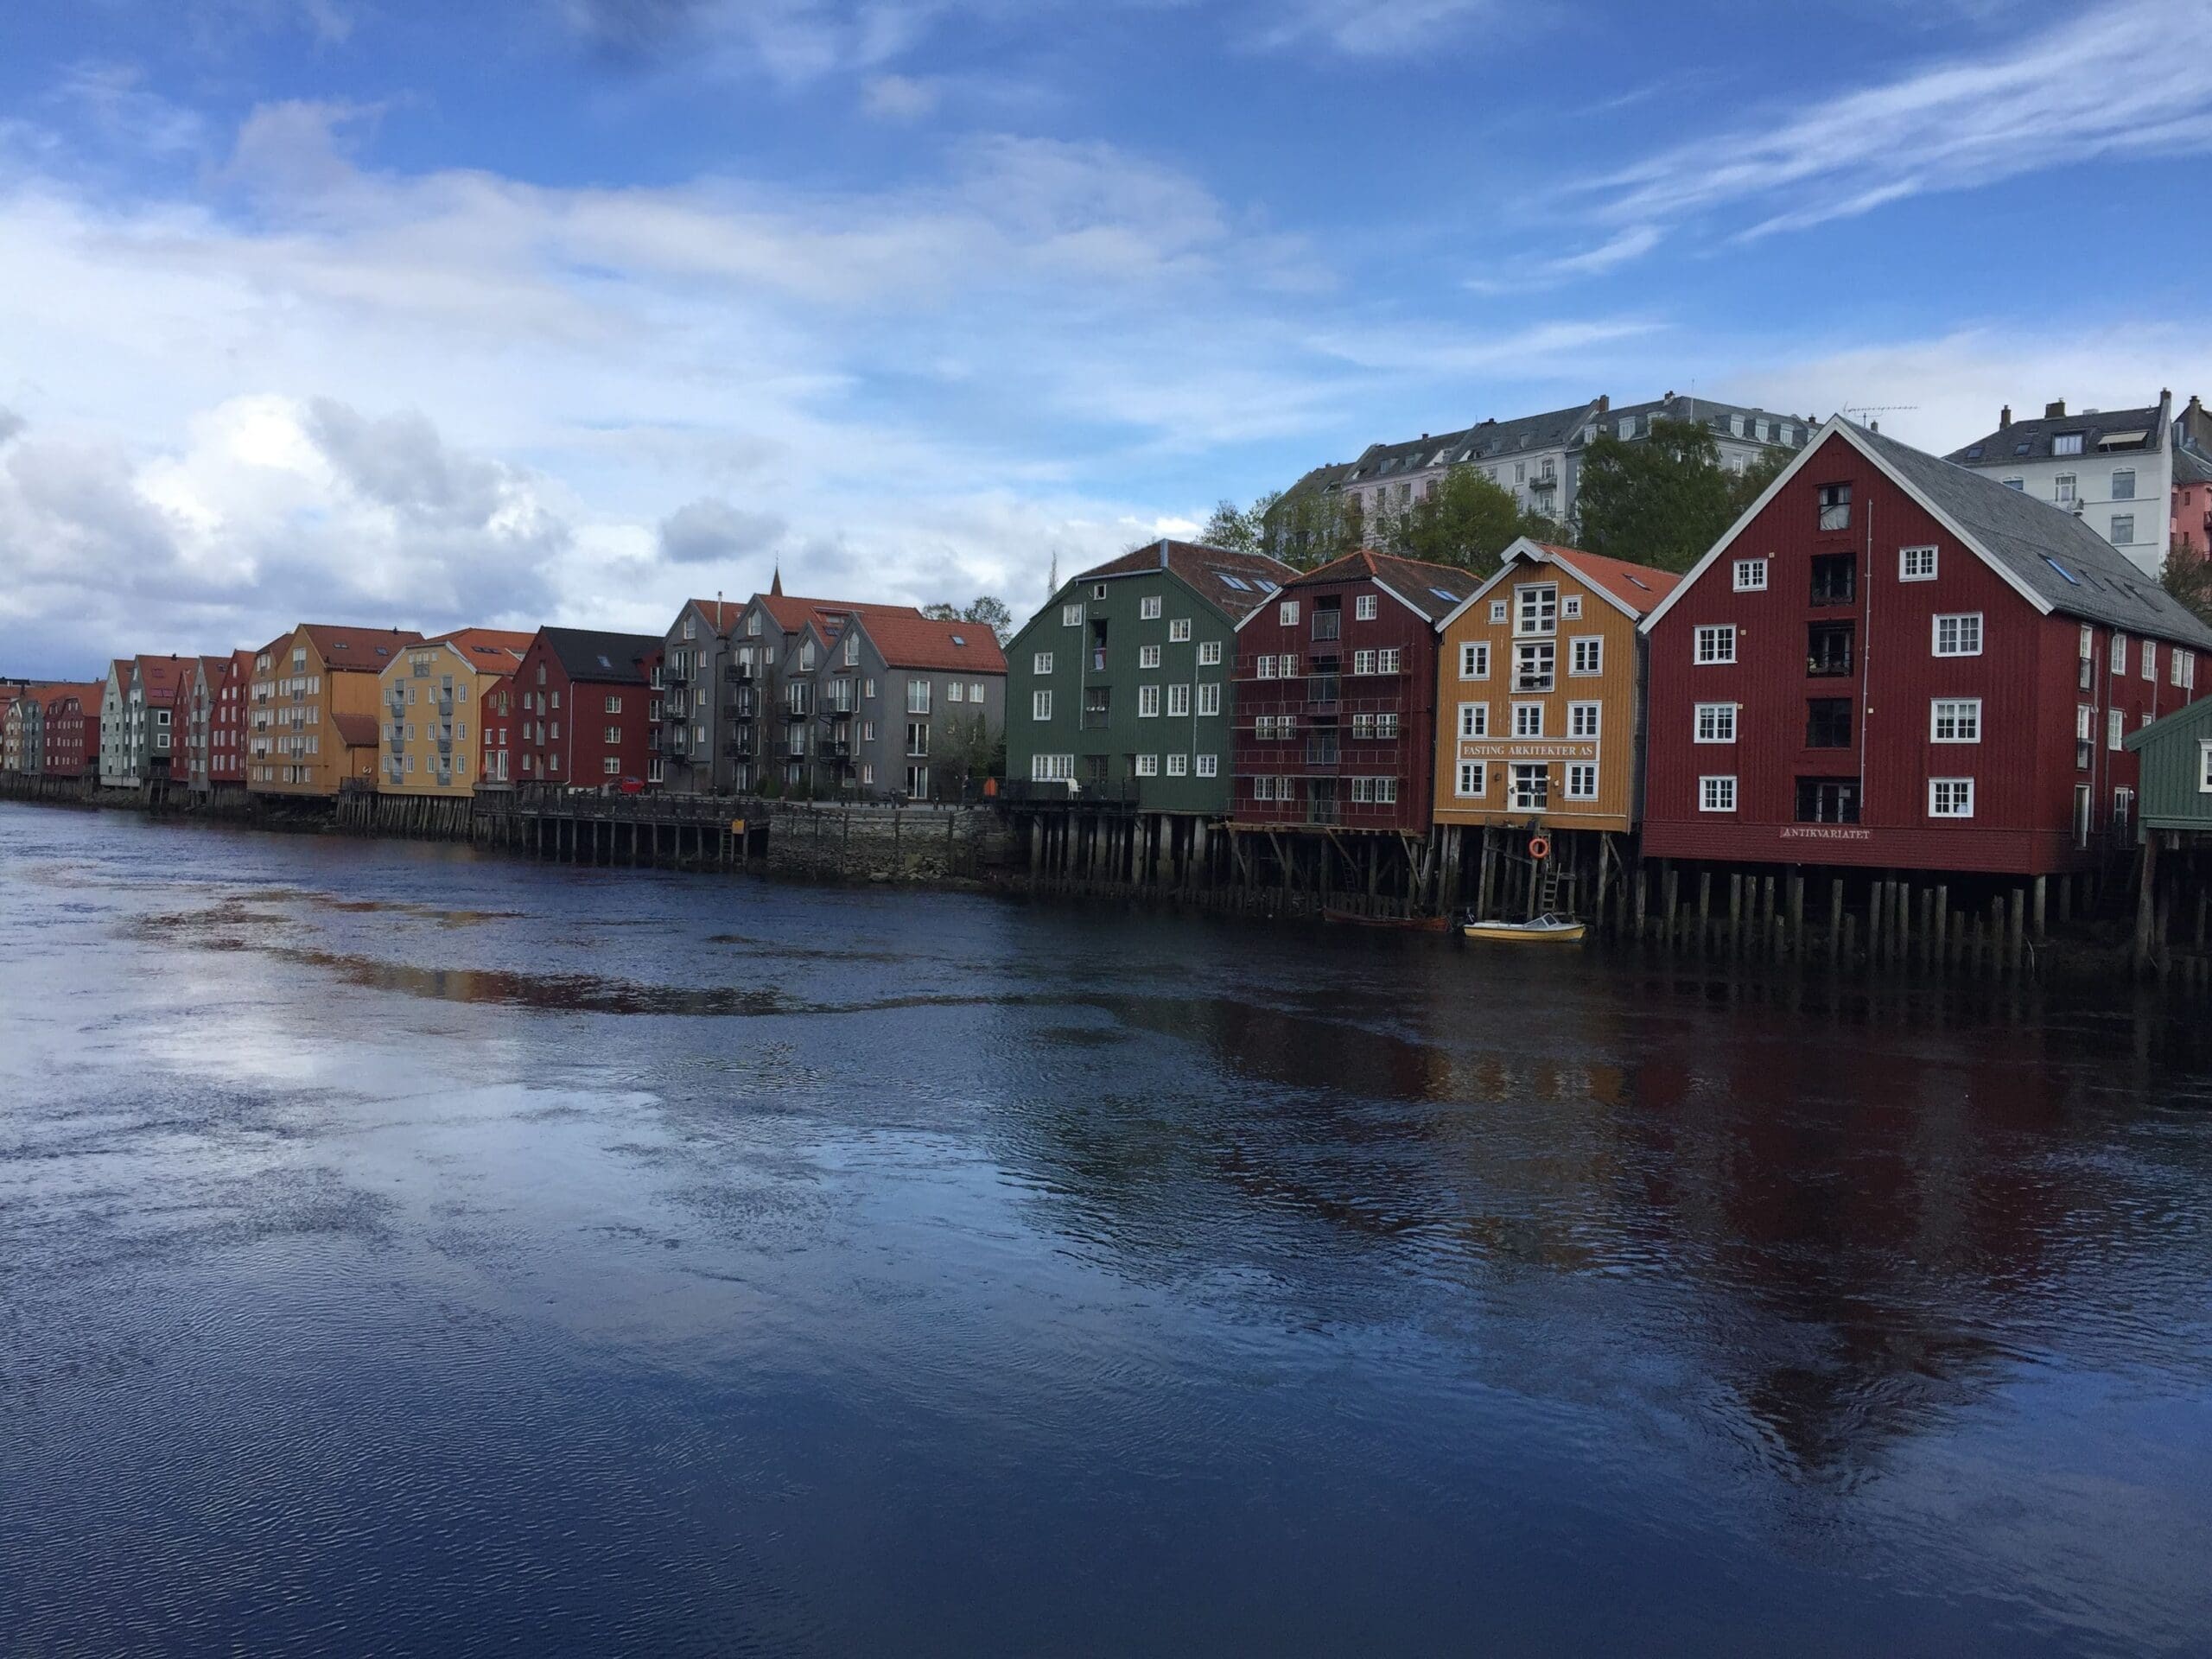 The Wooden Houses - 3 Days in Trondheim Norway